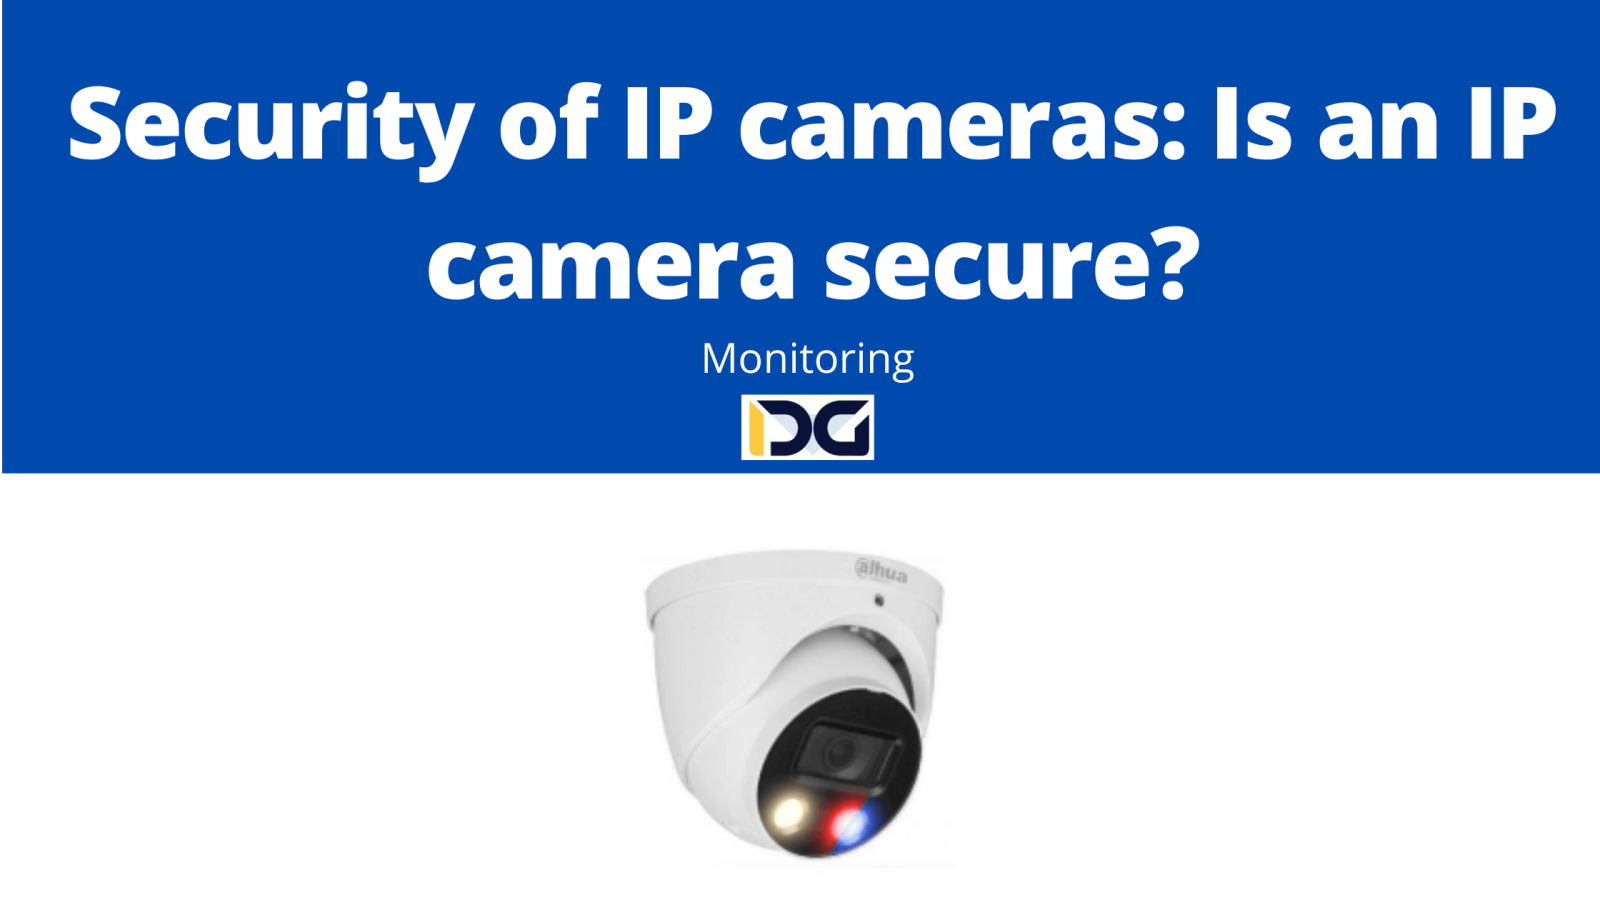 Security of IP cameras: Is an IP camera secure?